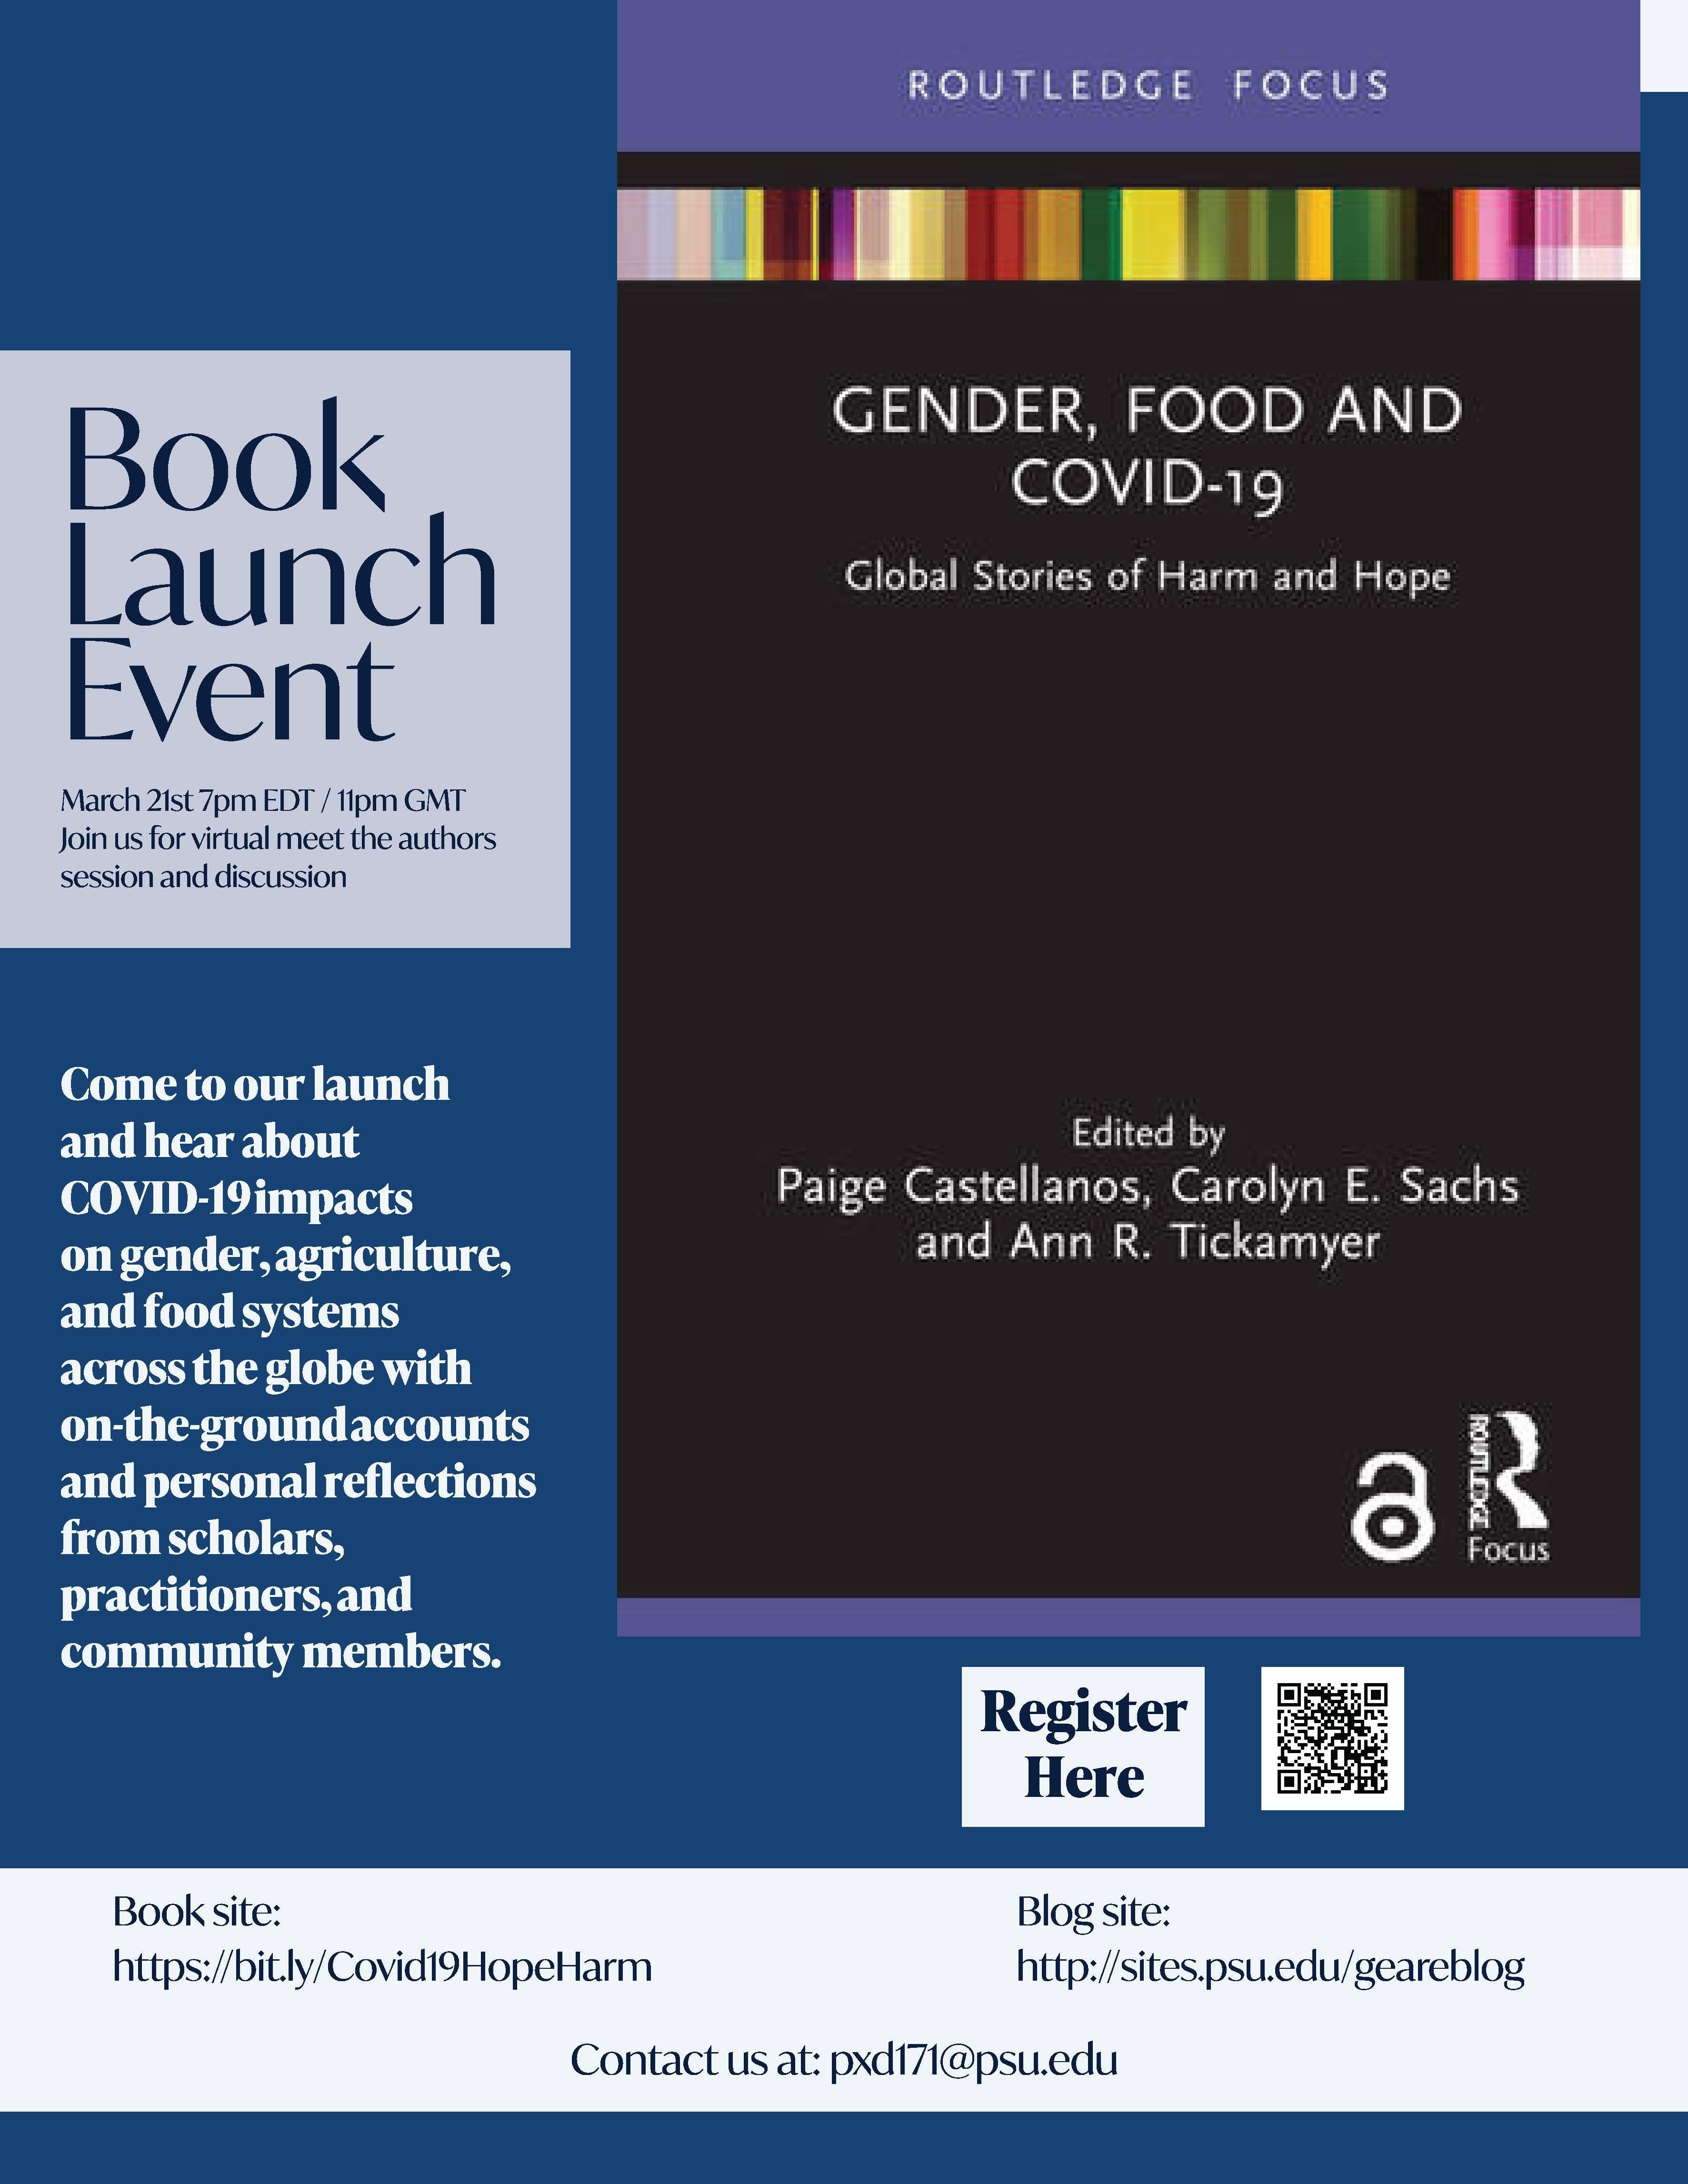 Gender, Food, and COVID-19: Stories of harm and hope